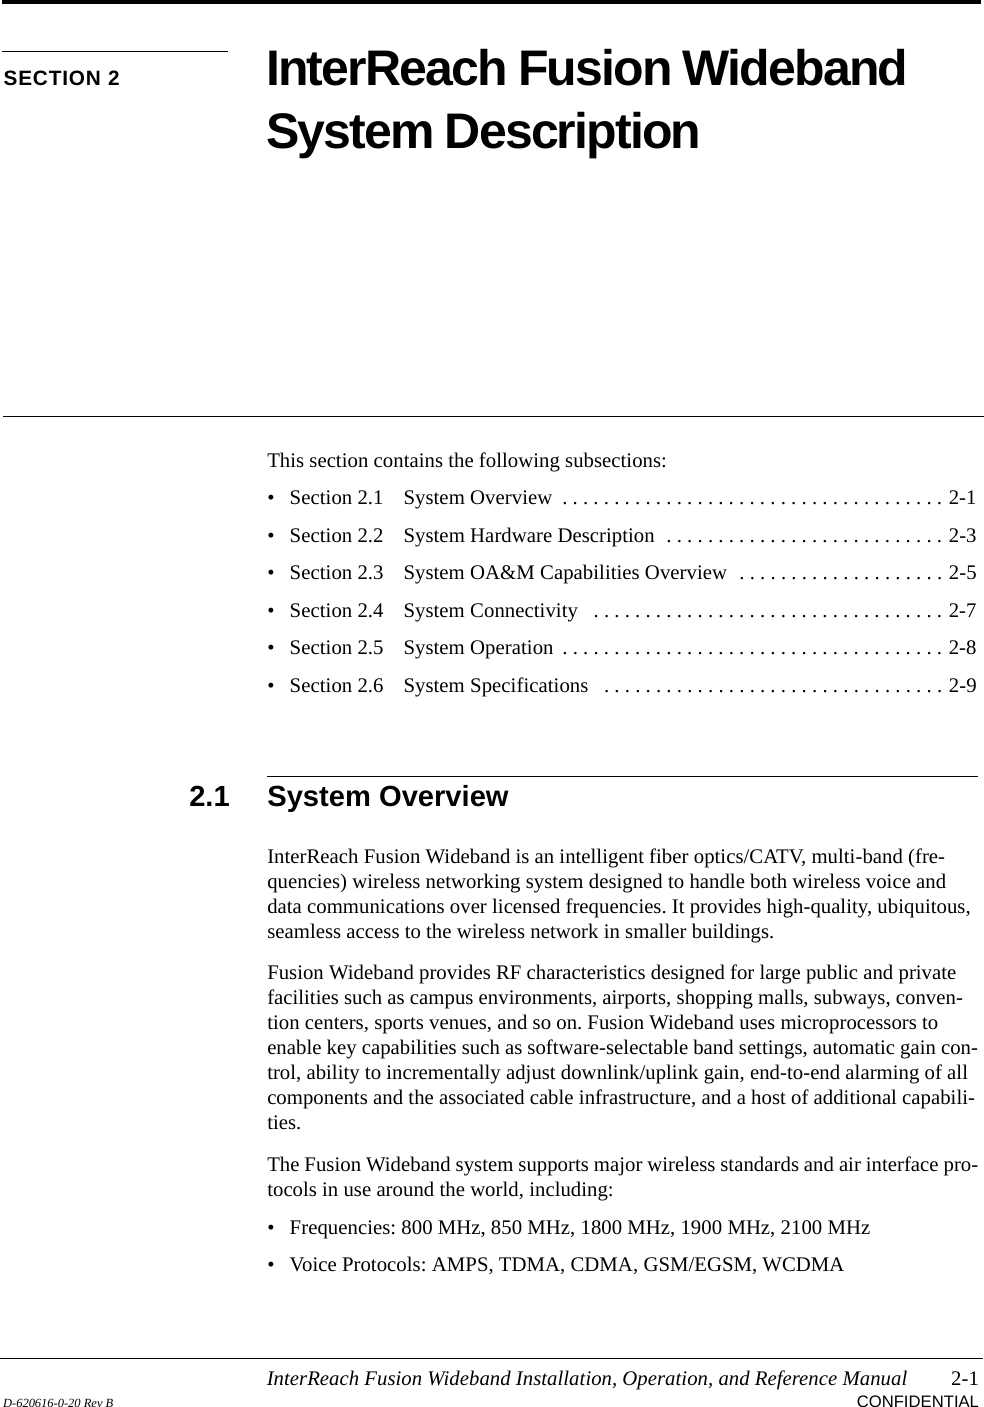 InterReach Fusion Wideband Installation, Operation, and Reference Manual 2-1D-620616-0-20 Rev B CONFIDENTIALSECTION 2 InterReach Fusion Wideband System DescriptionThis section contains the following subsections:• Section 2.1   System Overview  . . . . . . . . . . . . . . . . . . . . . . . . . . . . . . . . . . . . . 2-1• Section 2.2   System Hardware Description  . . . . . . . . . . . . . . . . . . . . . . . . . . . 2-3• Section 2.3   System OA&amp;M Capabilities Overview  . . . . . . . . . . . . . . . . . . . . 2-5• Section 2.4   System Connectivity   . . . . . . . . . . . . . . . . . . . . . . . . . . . . . . . . . . 2-7• Section 2.5   System Operation  . . . . . . . . . . . . . . . . . . . . . . . . . . . . . . . . . . . . . 2-8• Section 2.6   System Specifications   . . . . . . . . . . . . . . . . . . . . . . . . . . . . . . . . . 2-92.1 System OverviewInterReach Fusion Wideband is an intelligent fiber optics/CATV, multi-band (fre-quencies) wireless networking system designed to handle both wireless voice and data communications over licensed frequencies. It provides high-quality, ubiquitous, seamless access to the wireless network in smaller buildings.Fusion Wideband provides RF characteristics designed for large public and private facilities such as campus environments, airports, shopping malls, subways, conven-tion centers, sports venues, and so on. Fusion Wideband uses microprocessors to enable key capabilities such as software-selectable band settings, automatic gain con-trol, ability to incrementally adjust downlink/uplink gain, end-to-end alarming of all components and the associated cable infrastructure, and a host of additional capabili-ties.The Fusion Wideband system supports major wireless standards and air interface pro-tocols in use around the world, including:• Frequencies: 800 MHz, 850 MHz, 1800 MHz, 1900 MHz, 2100 MHz• Voice Protocols: AMPS, TDMA, CDMA, GSM/EGSM, WCDMA